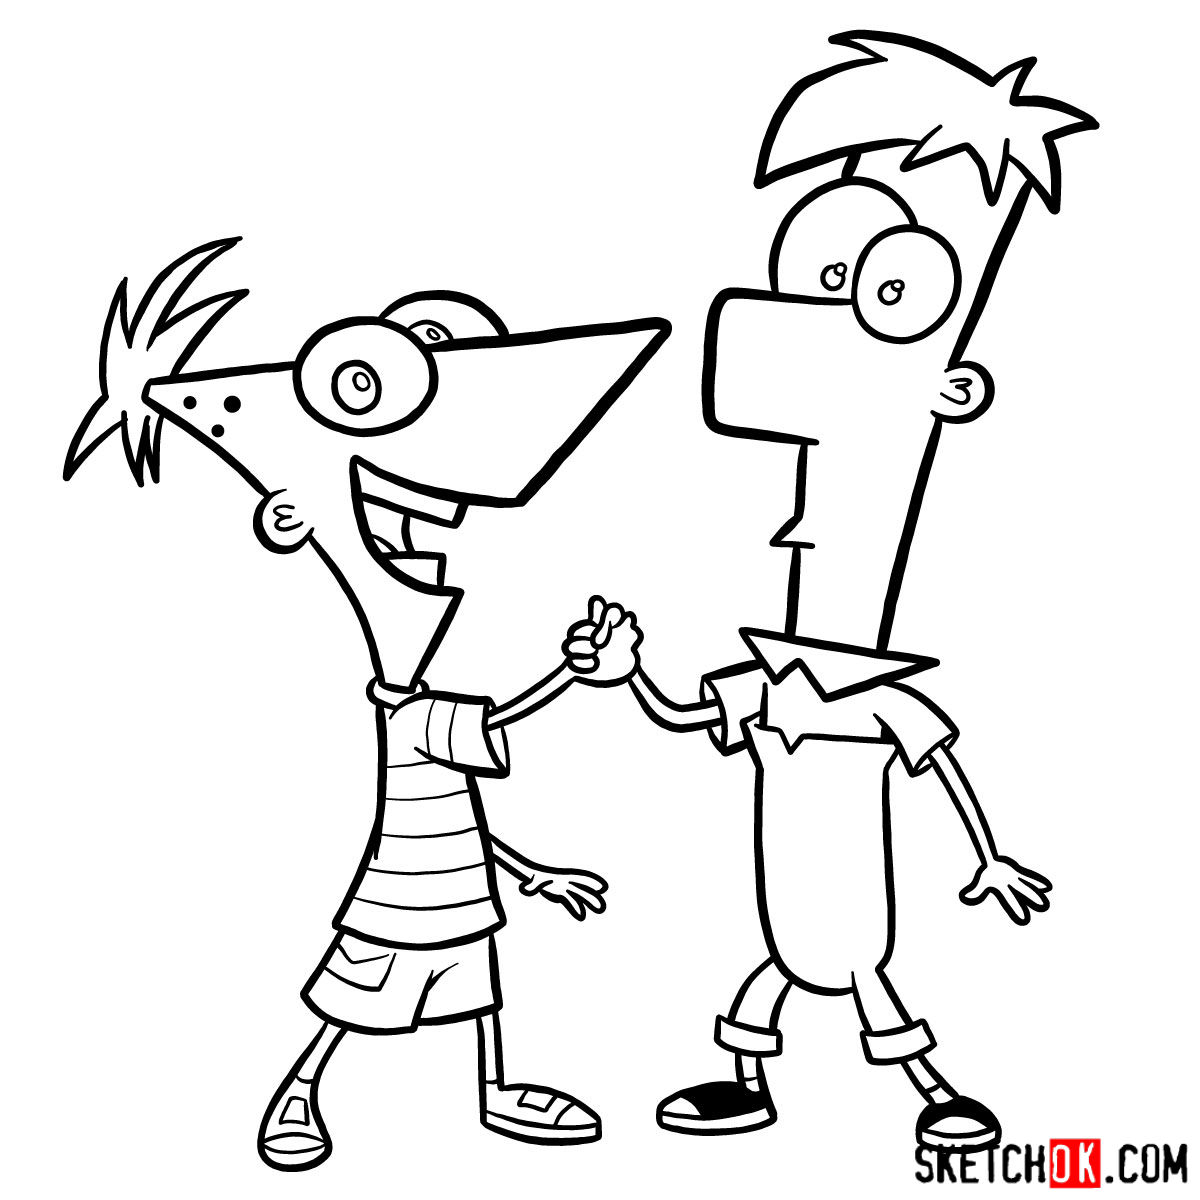 How to draw Phineas and Ferb - step 17